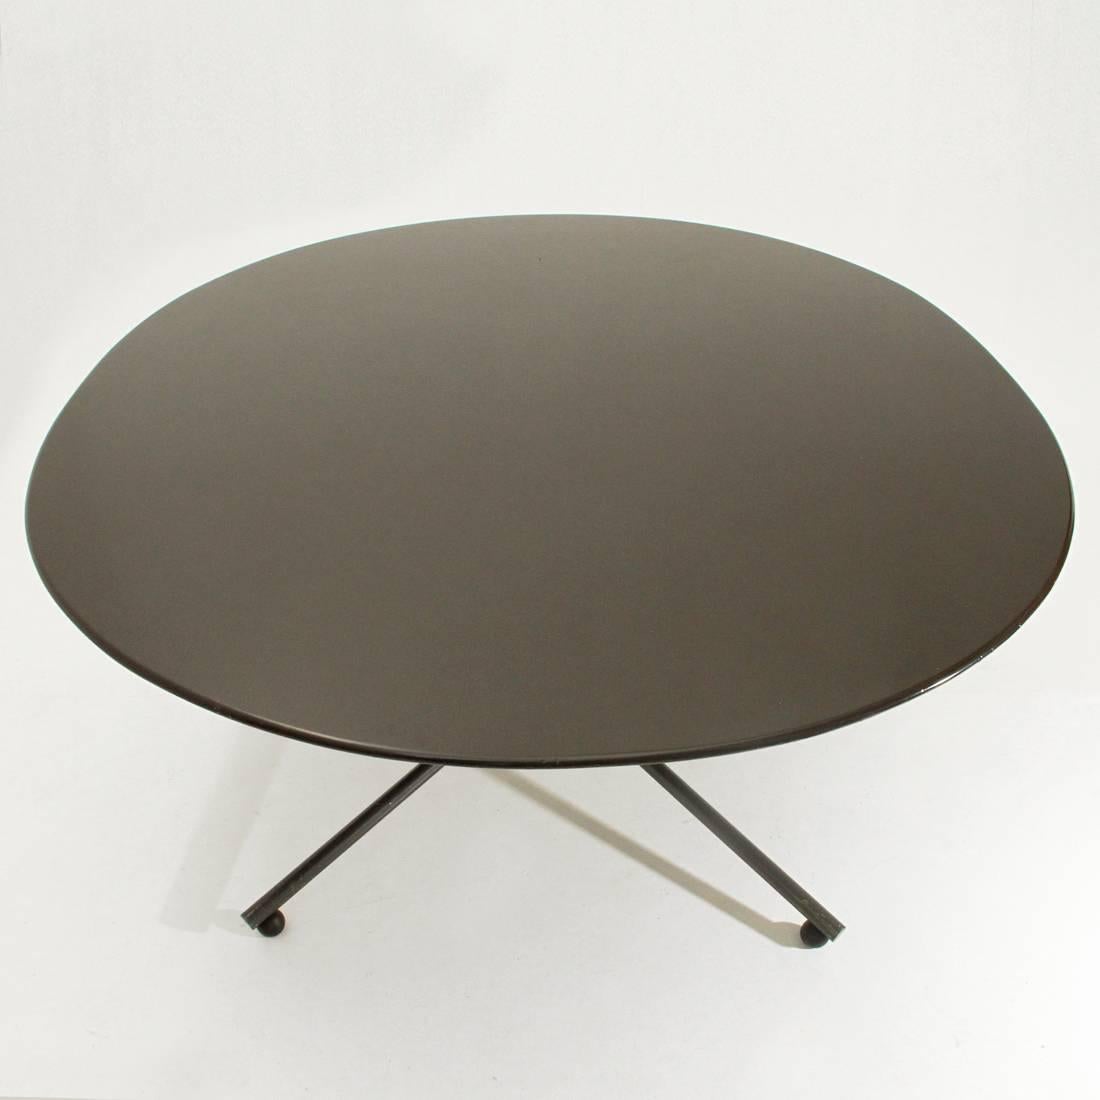 Table designed by Vico Magistretti and produced by Gavina in 1961.
Enamelled steel base, wooden elliptical top with tapered edge and top lacquered side,
Spherical rubber feet.
structure in good condition, signs of wear on the plane and on the